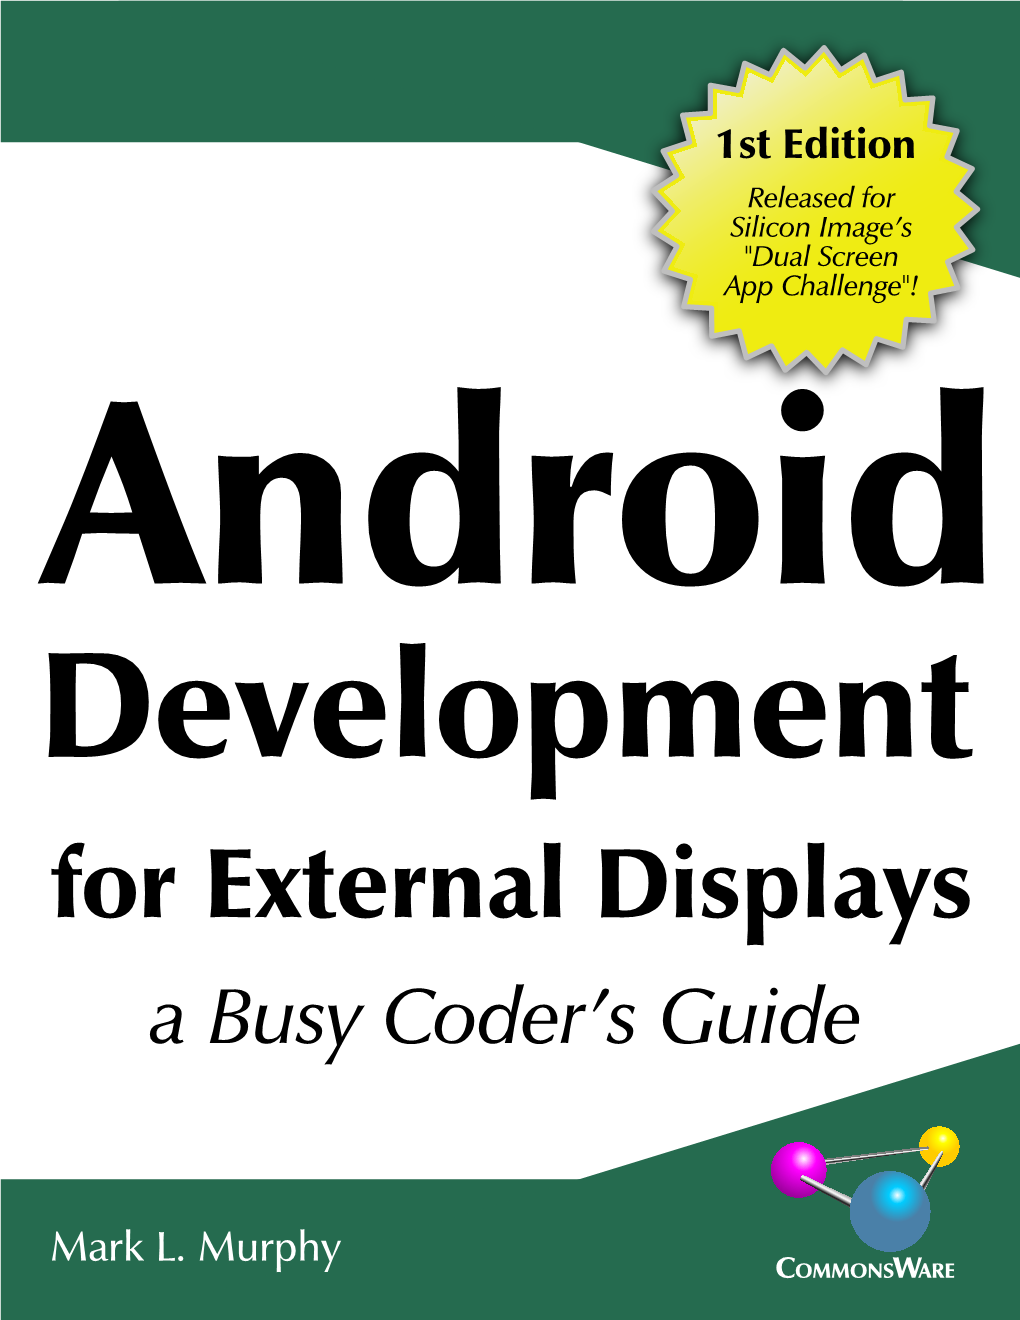 Android Development for External Displays: a Busy Coder's Guide